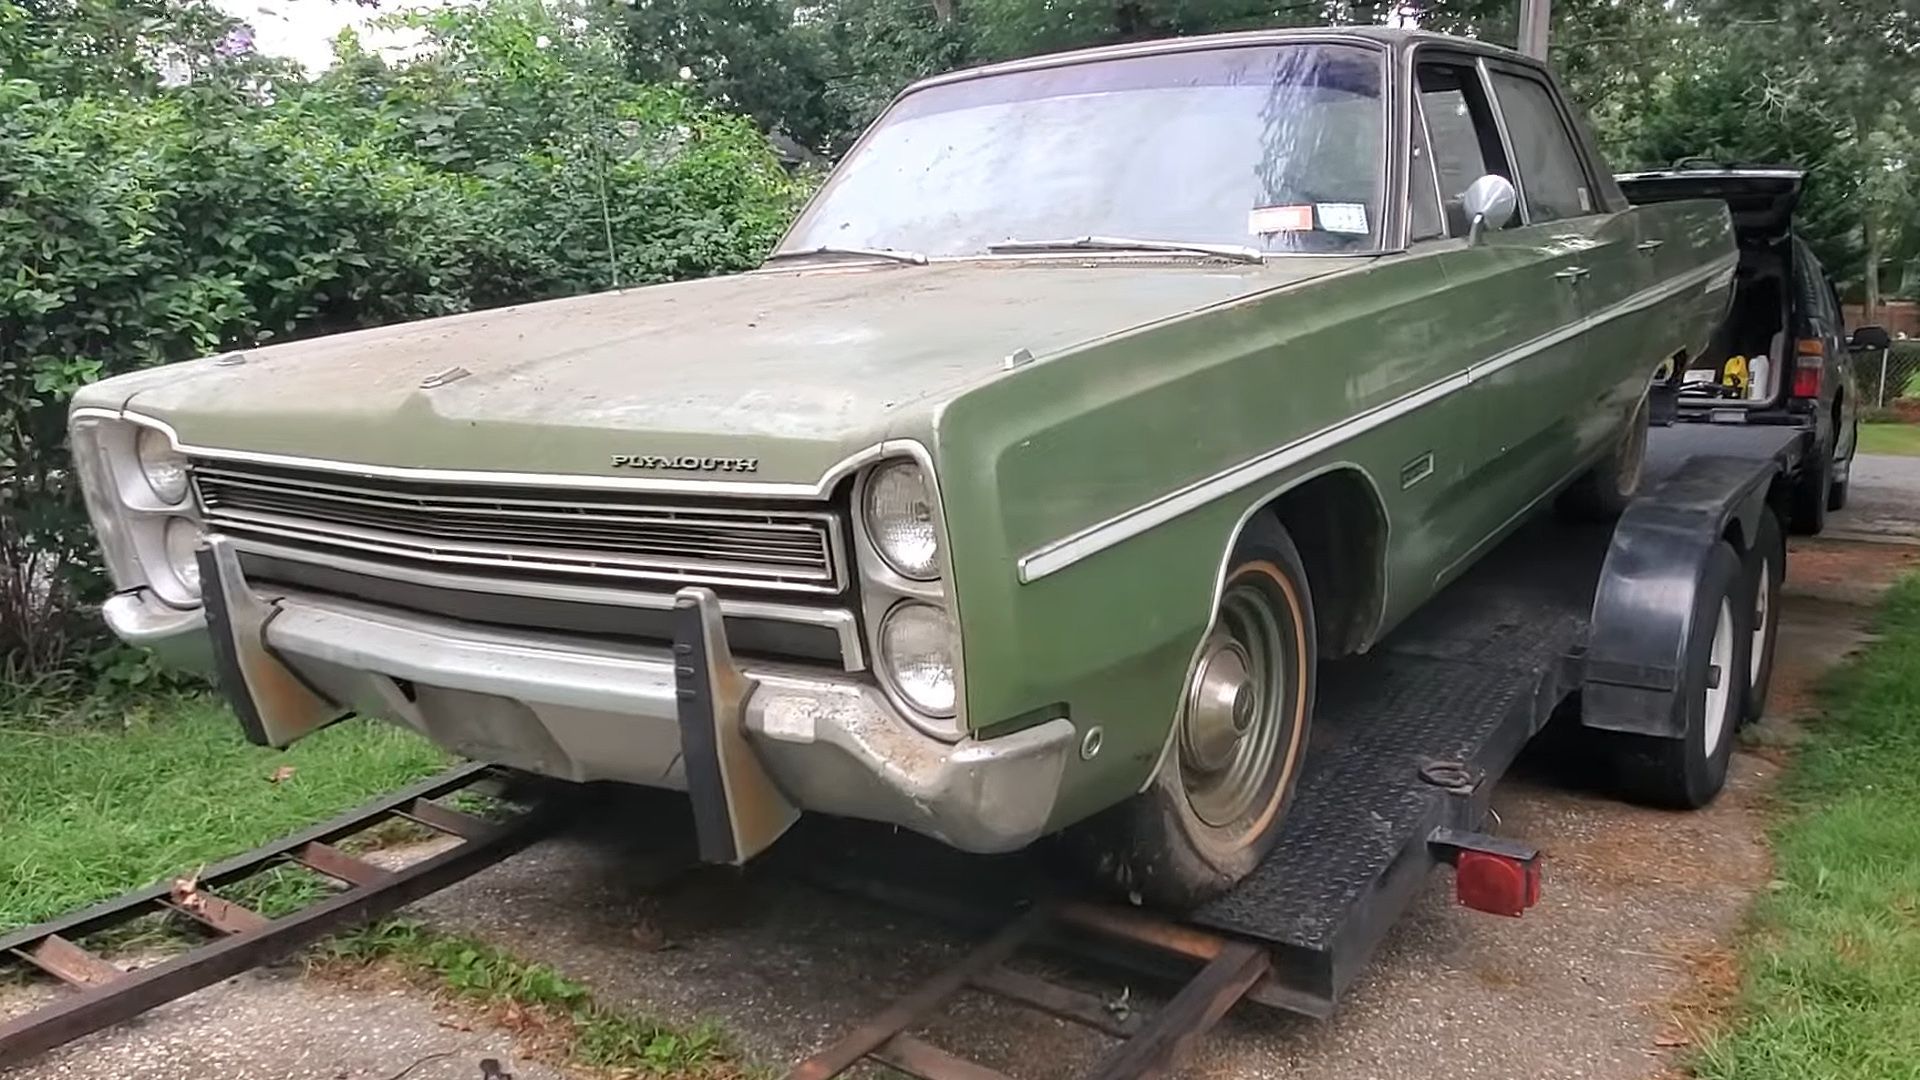 Unearthing a Forgotten Gem: The 30-Year Slumber of a 1968 Plymouth Fury